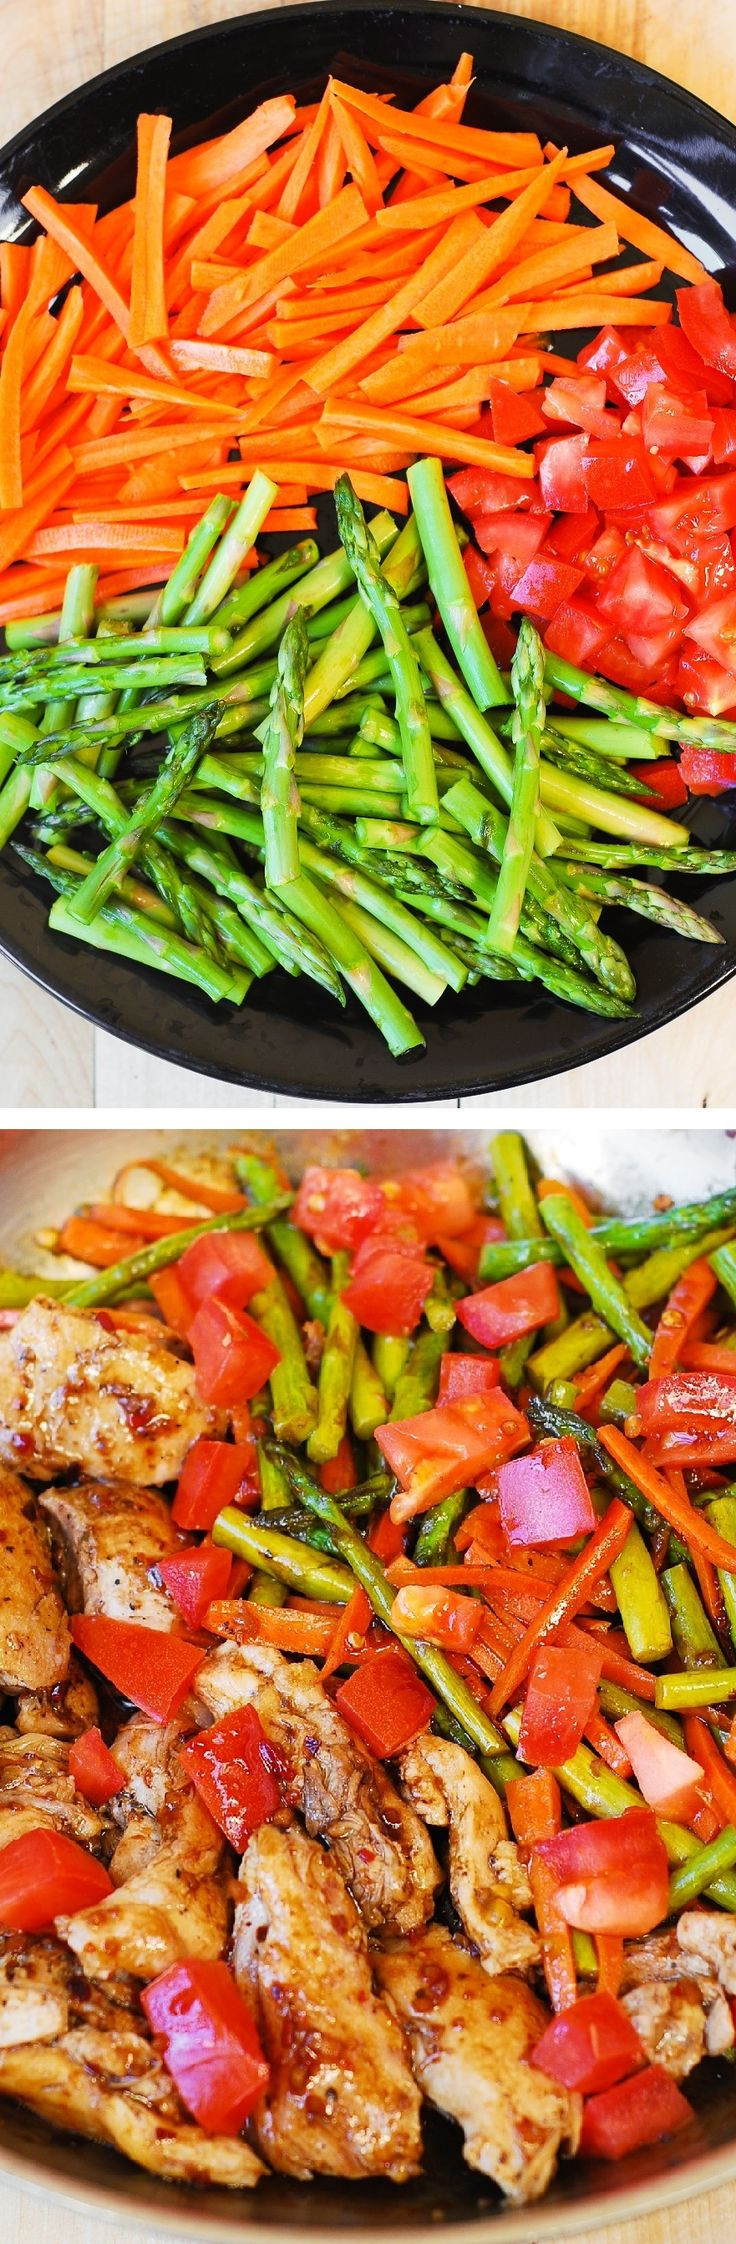 Healthy Low Fat Recipes For Weight Loss
 Best 25 Weight loss meals ideas on Pinterest